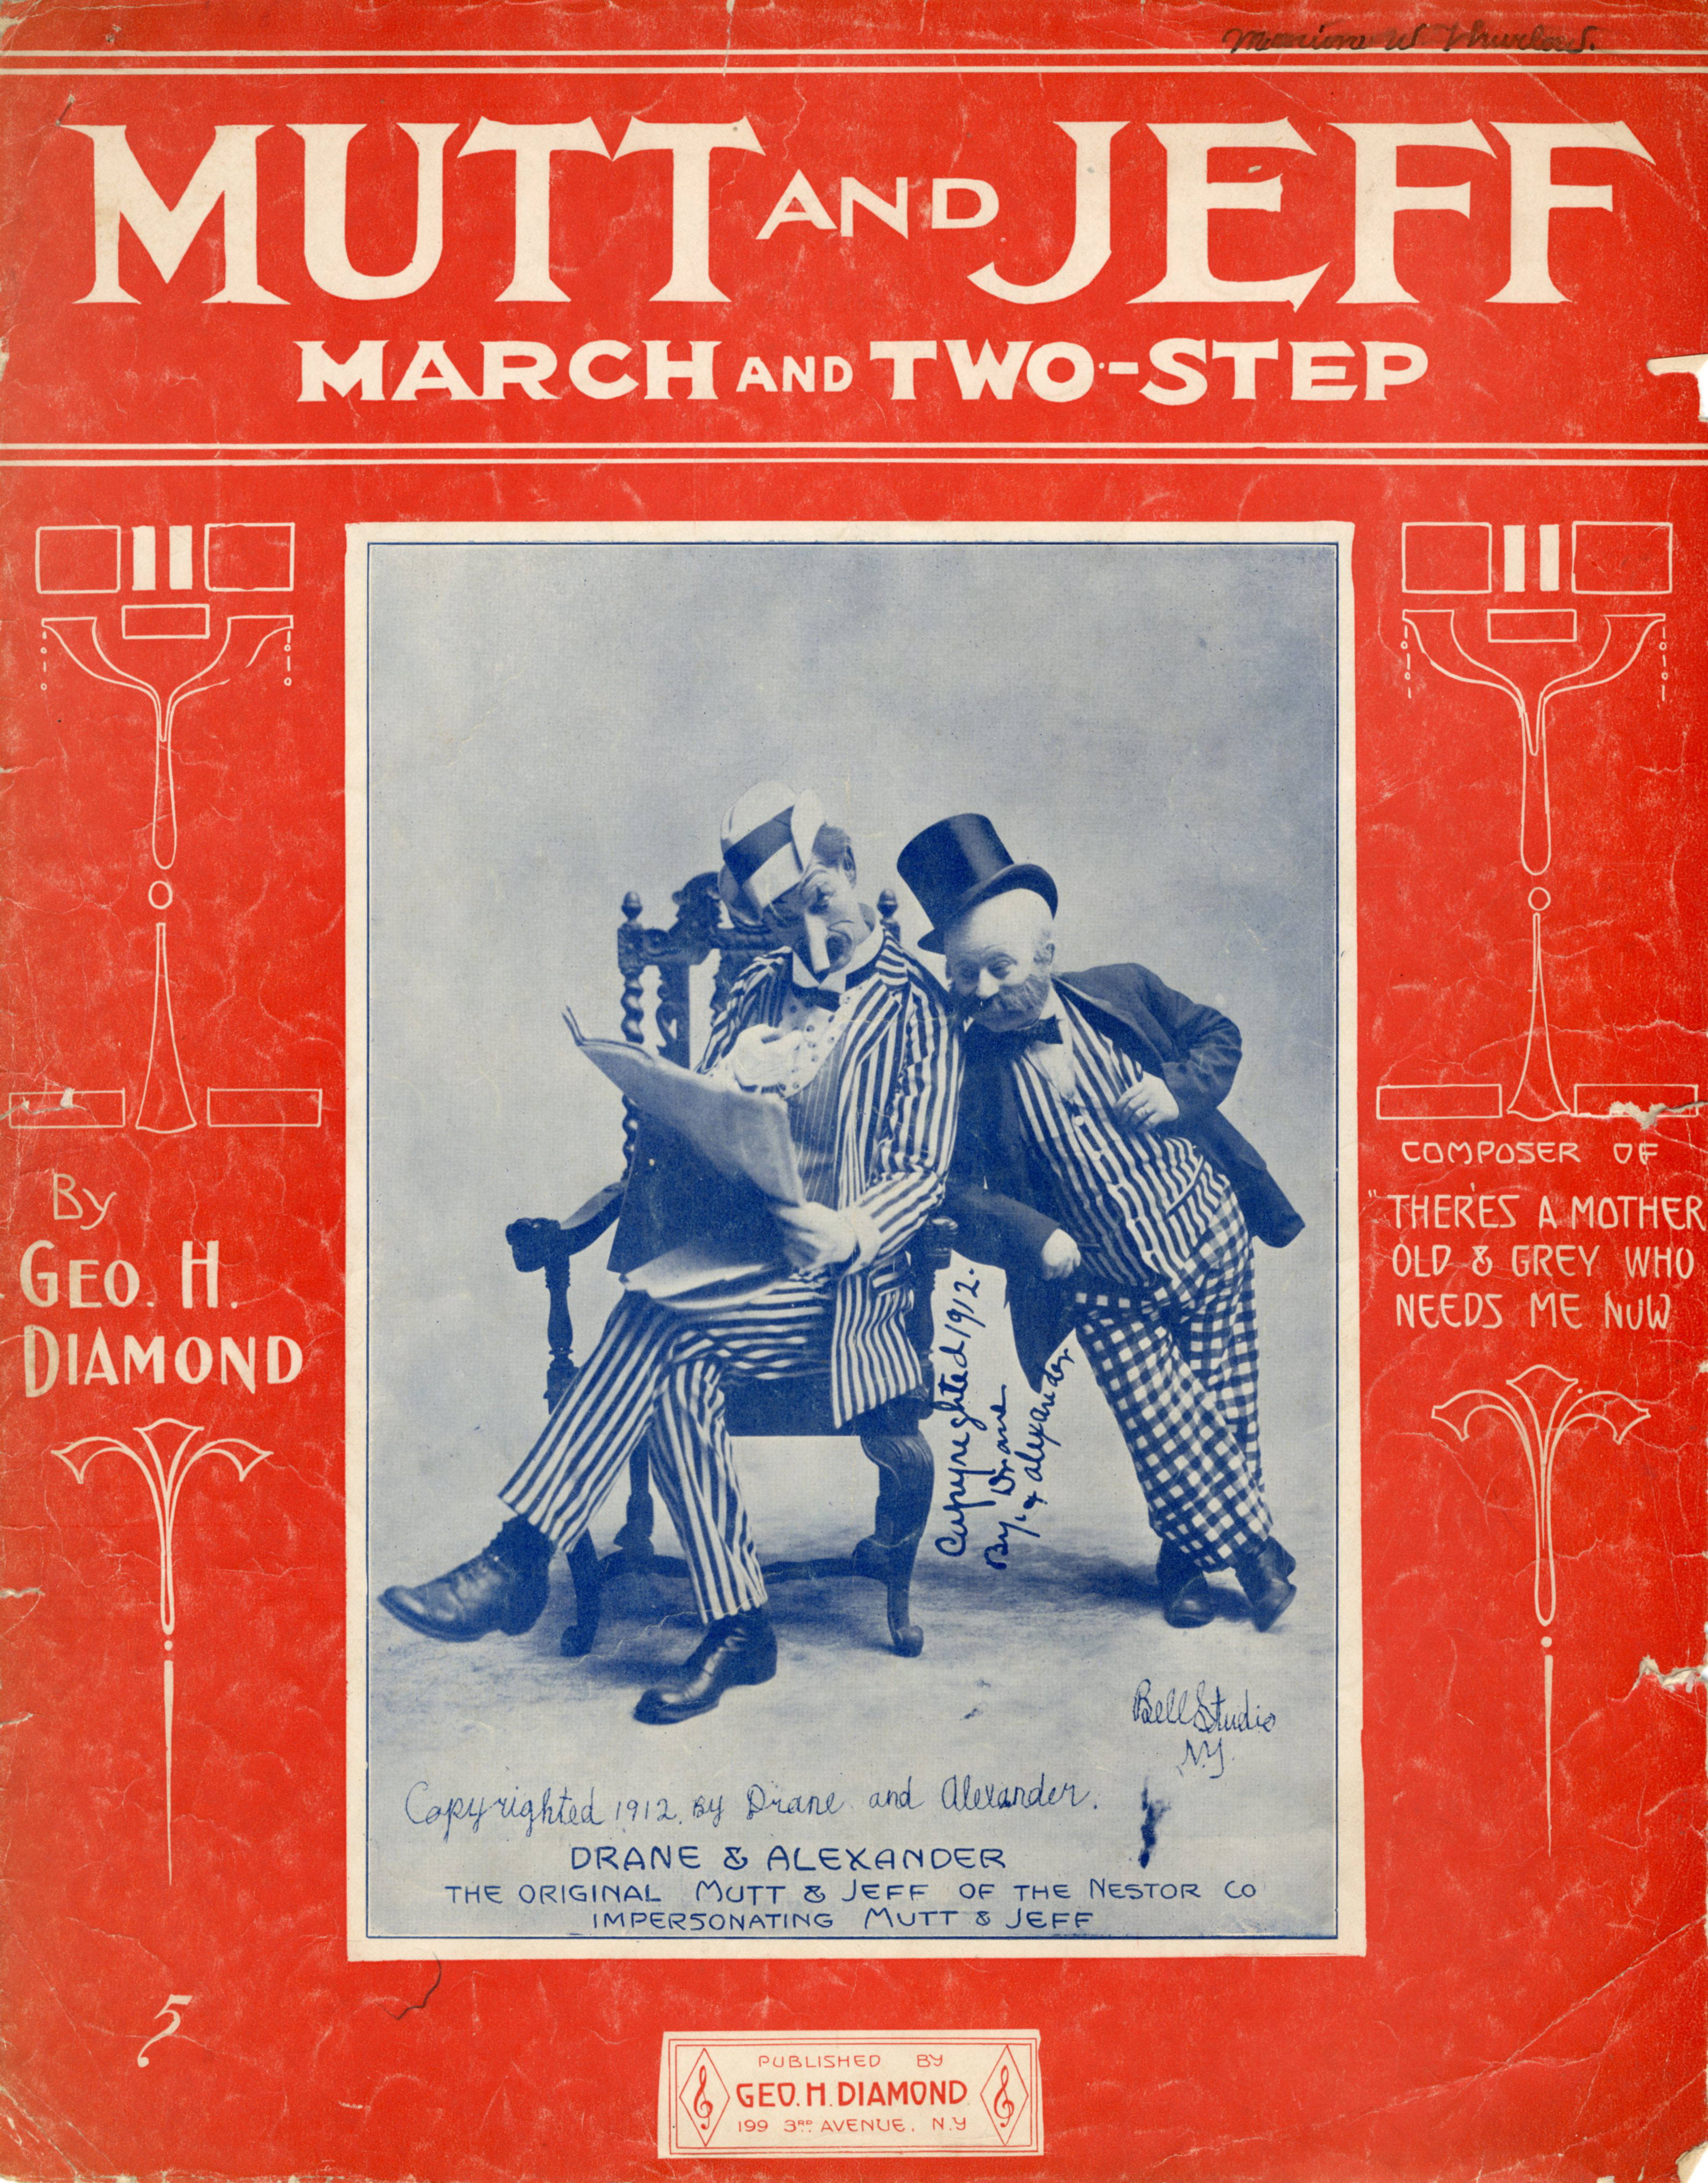 Sheet music cover - MUTT AND JEFF - MARCH AND TWO-STEP (1912)